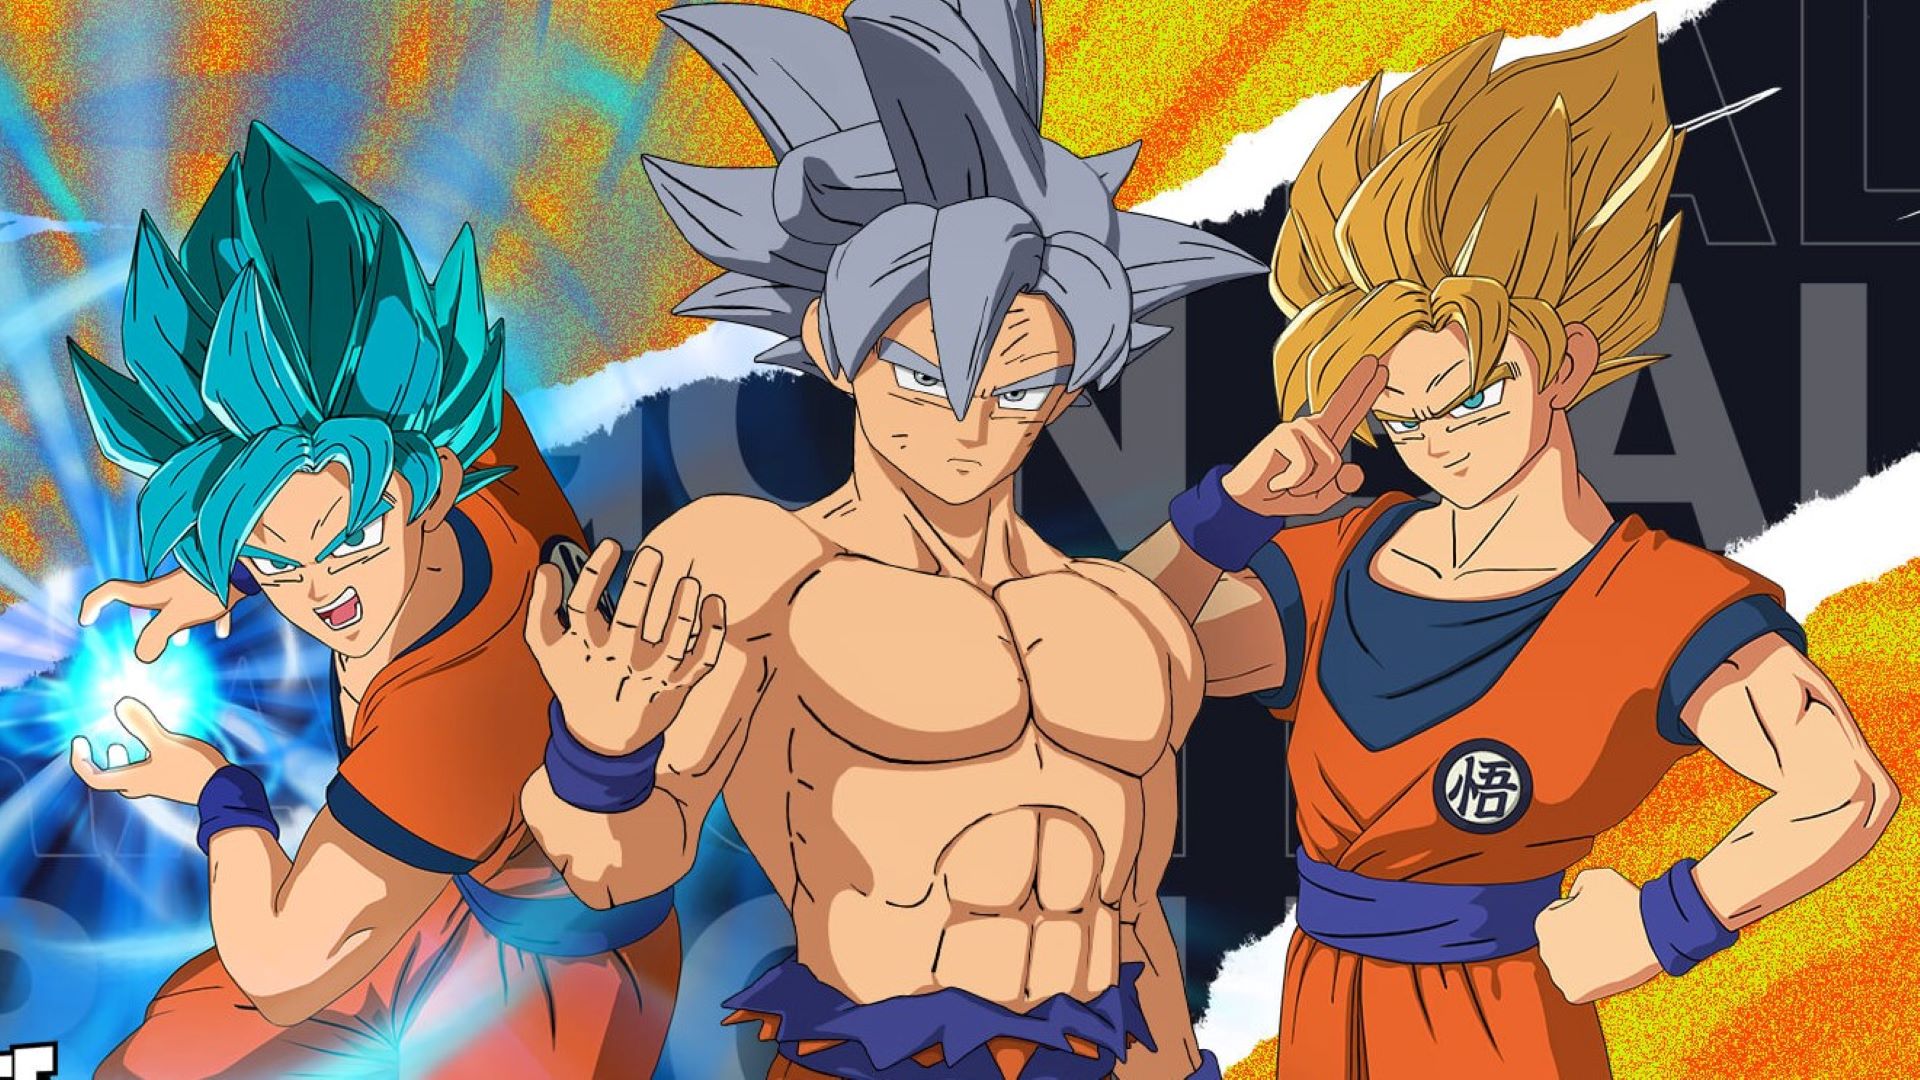 Fortnite Goku's head is shrinking, and it actually looks better